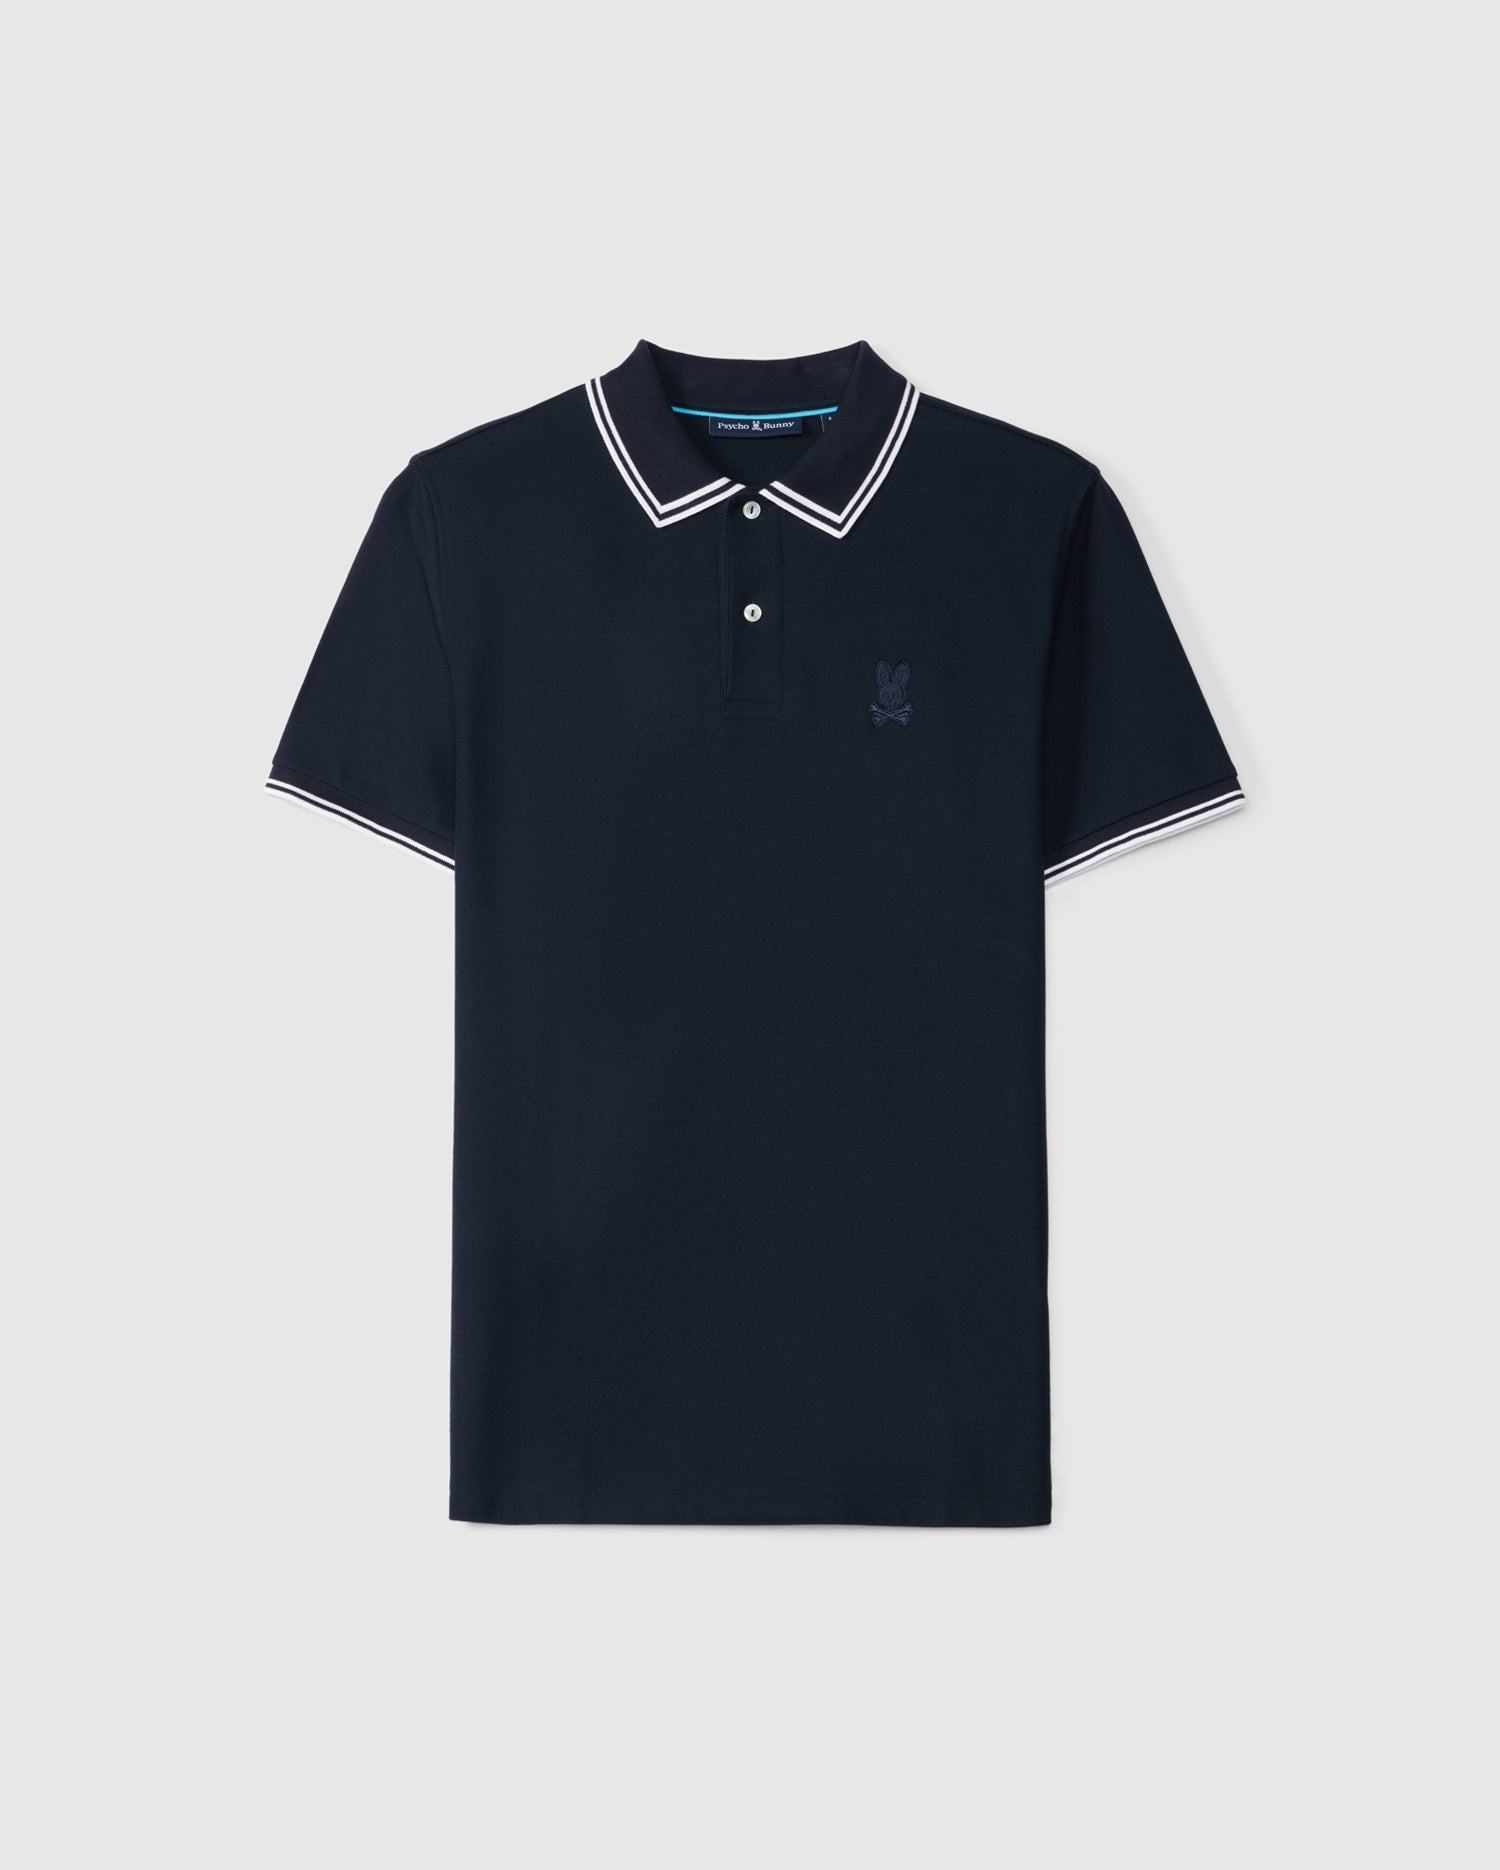 A navy blue Psycho Bunny MENS BELTON PIQUE POLO - B6K575C200 with contrasting tipping on the collar and sleeves. The shirt features a three-button placket and an embroidered Bunny logo on the left chest, set against a plain, light grey background.